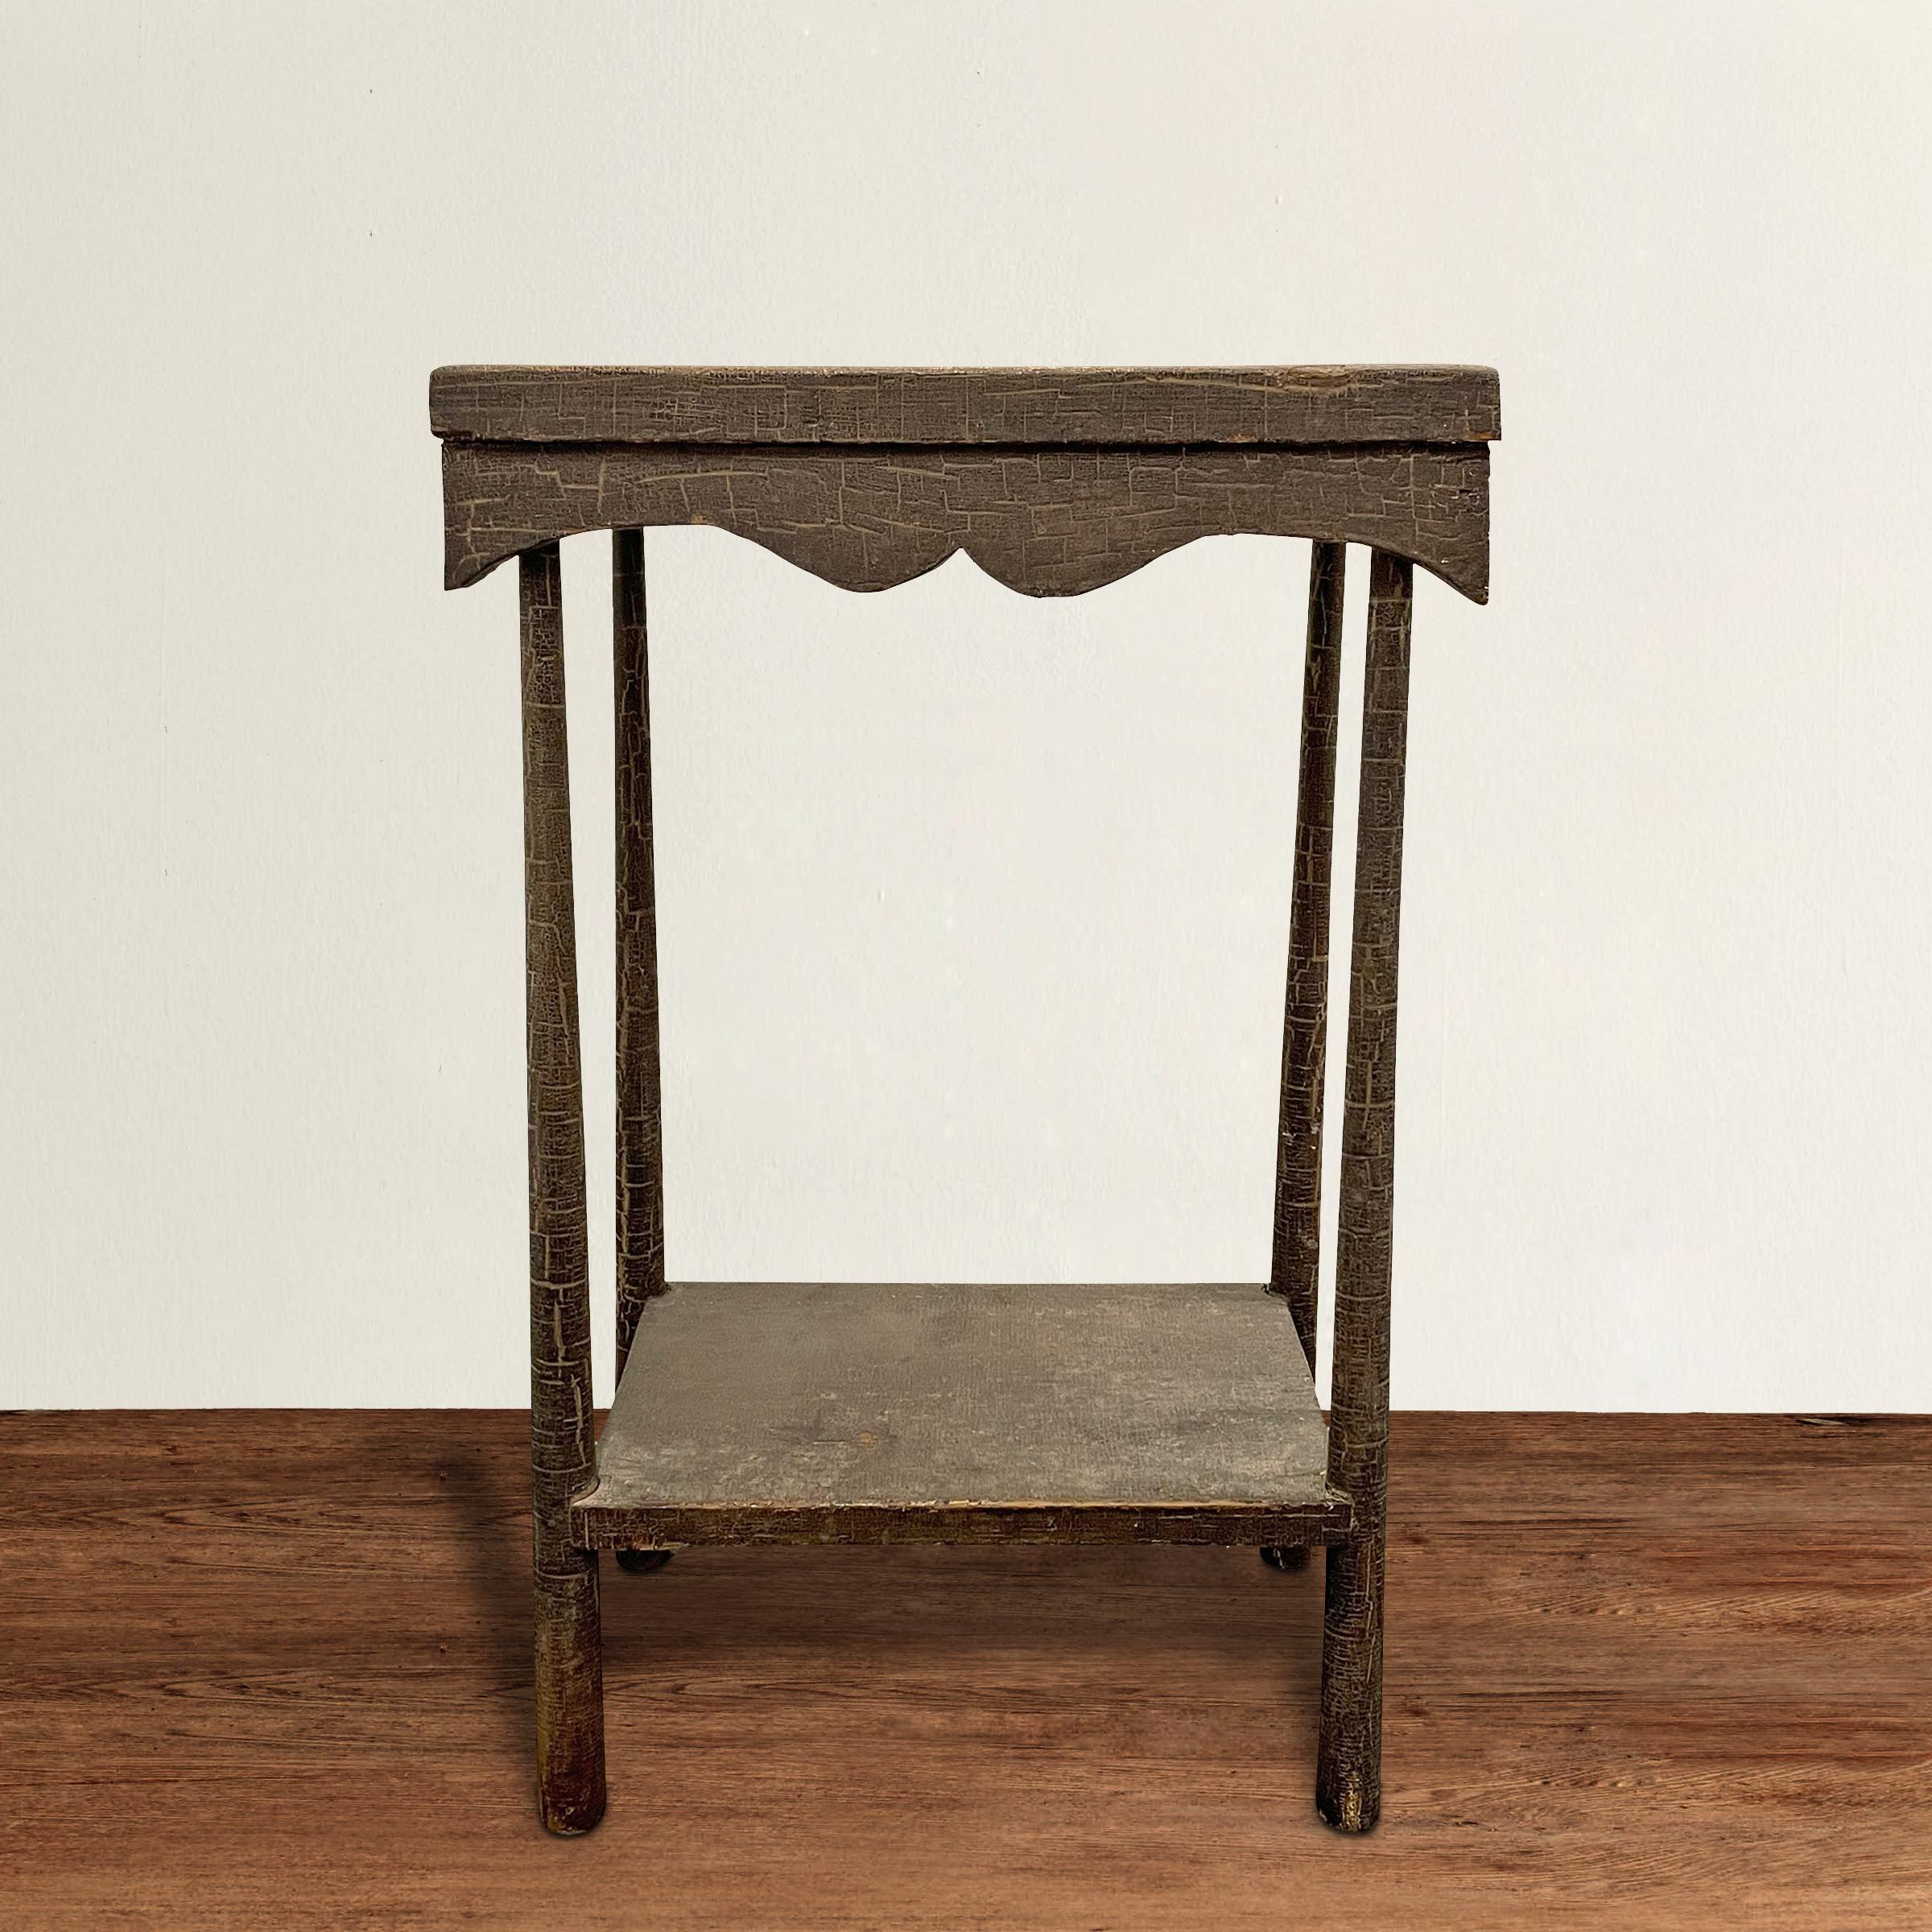 A wonderfully charming and full-of-personality 19th century American Folk Art side table constructed from parts of other tables over one years ago, and with a scalloped apron, slender tapered legs, a shelf, and the most beautiful paint with an